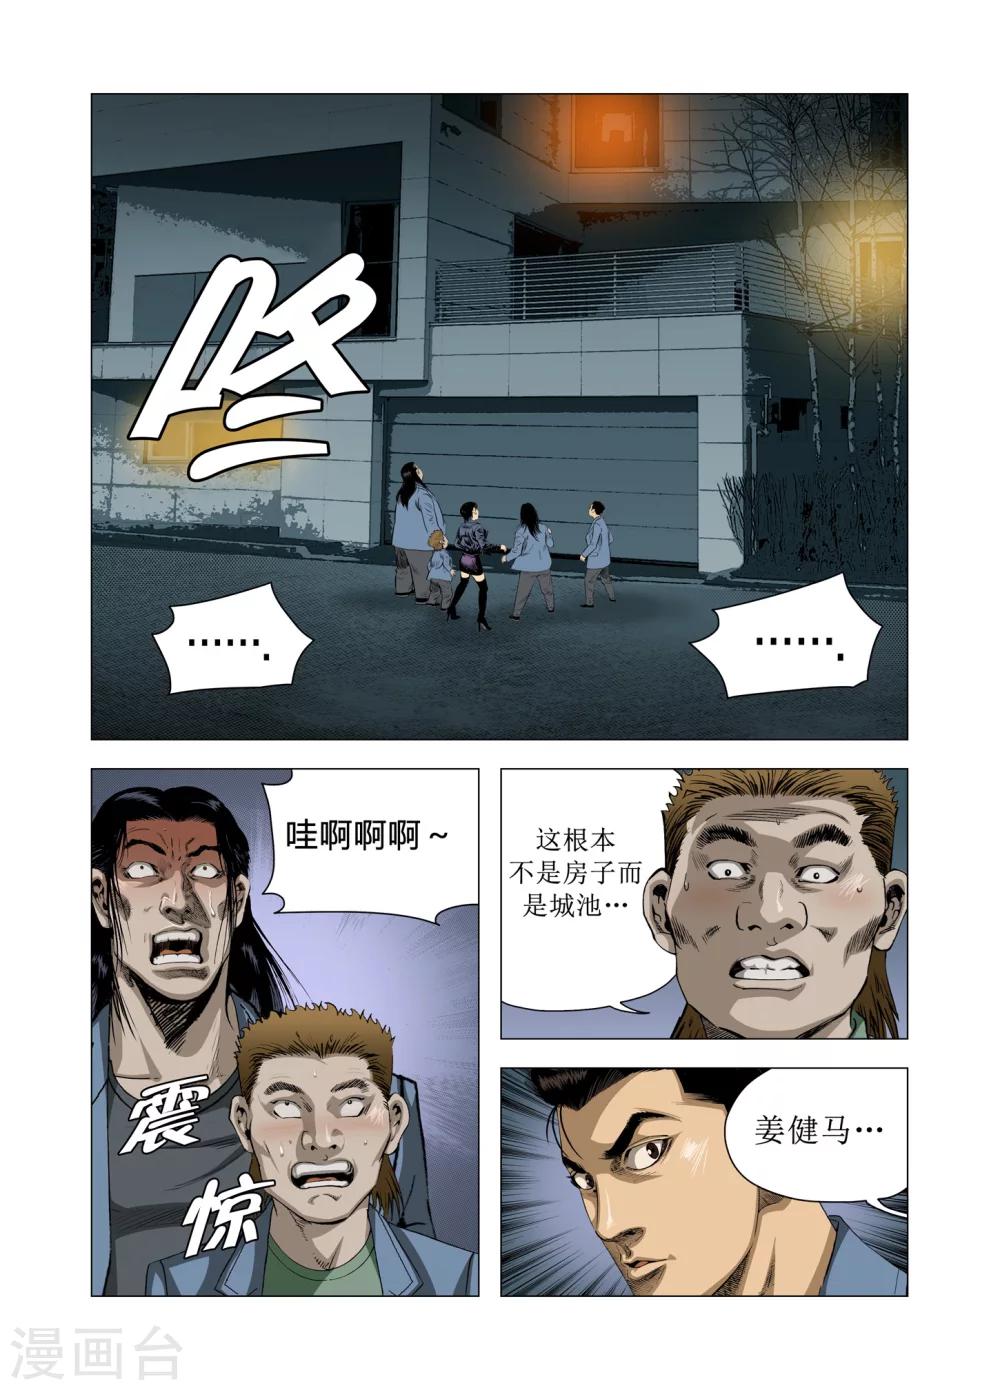 Role of 王 - 第75話 - 2